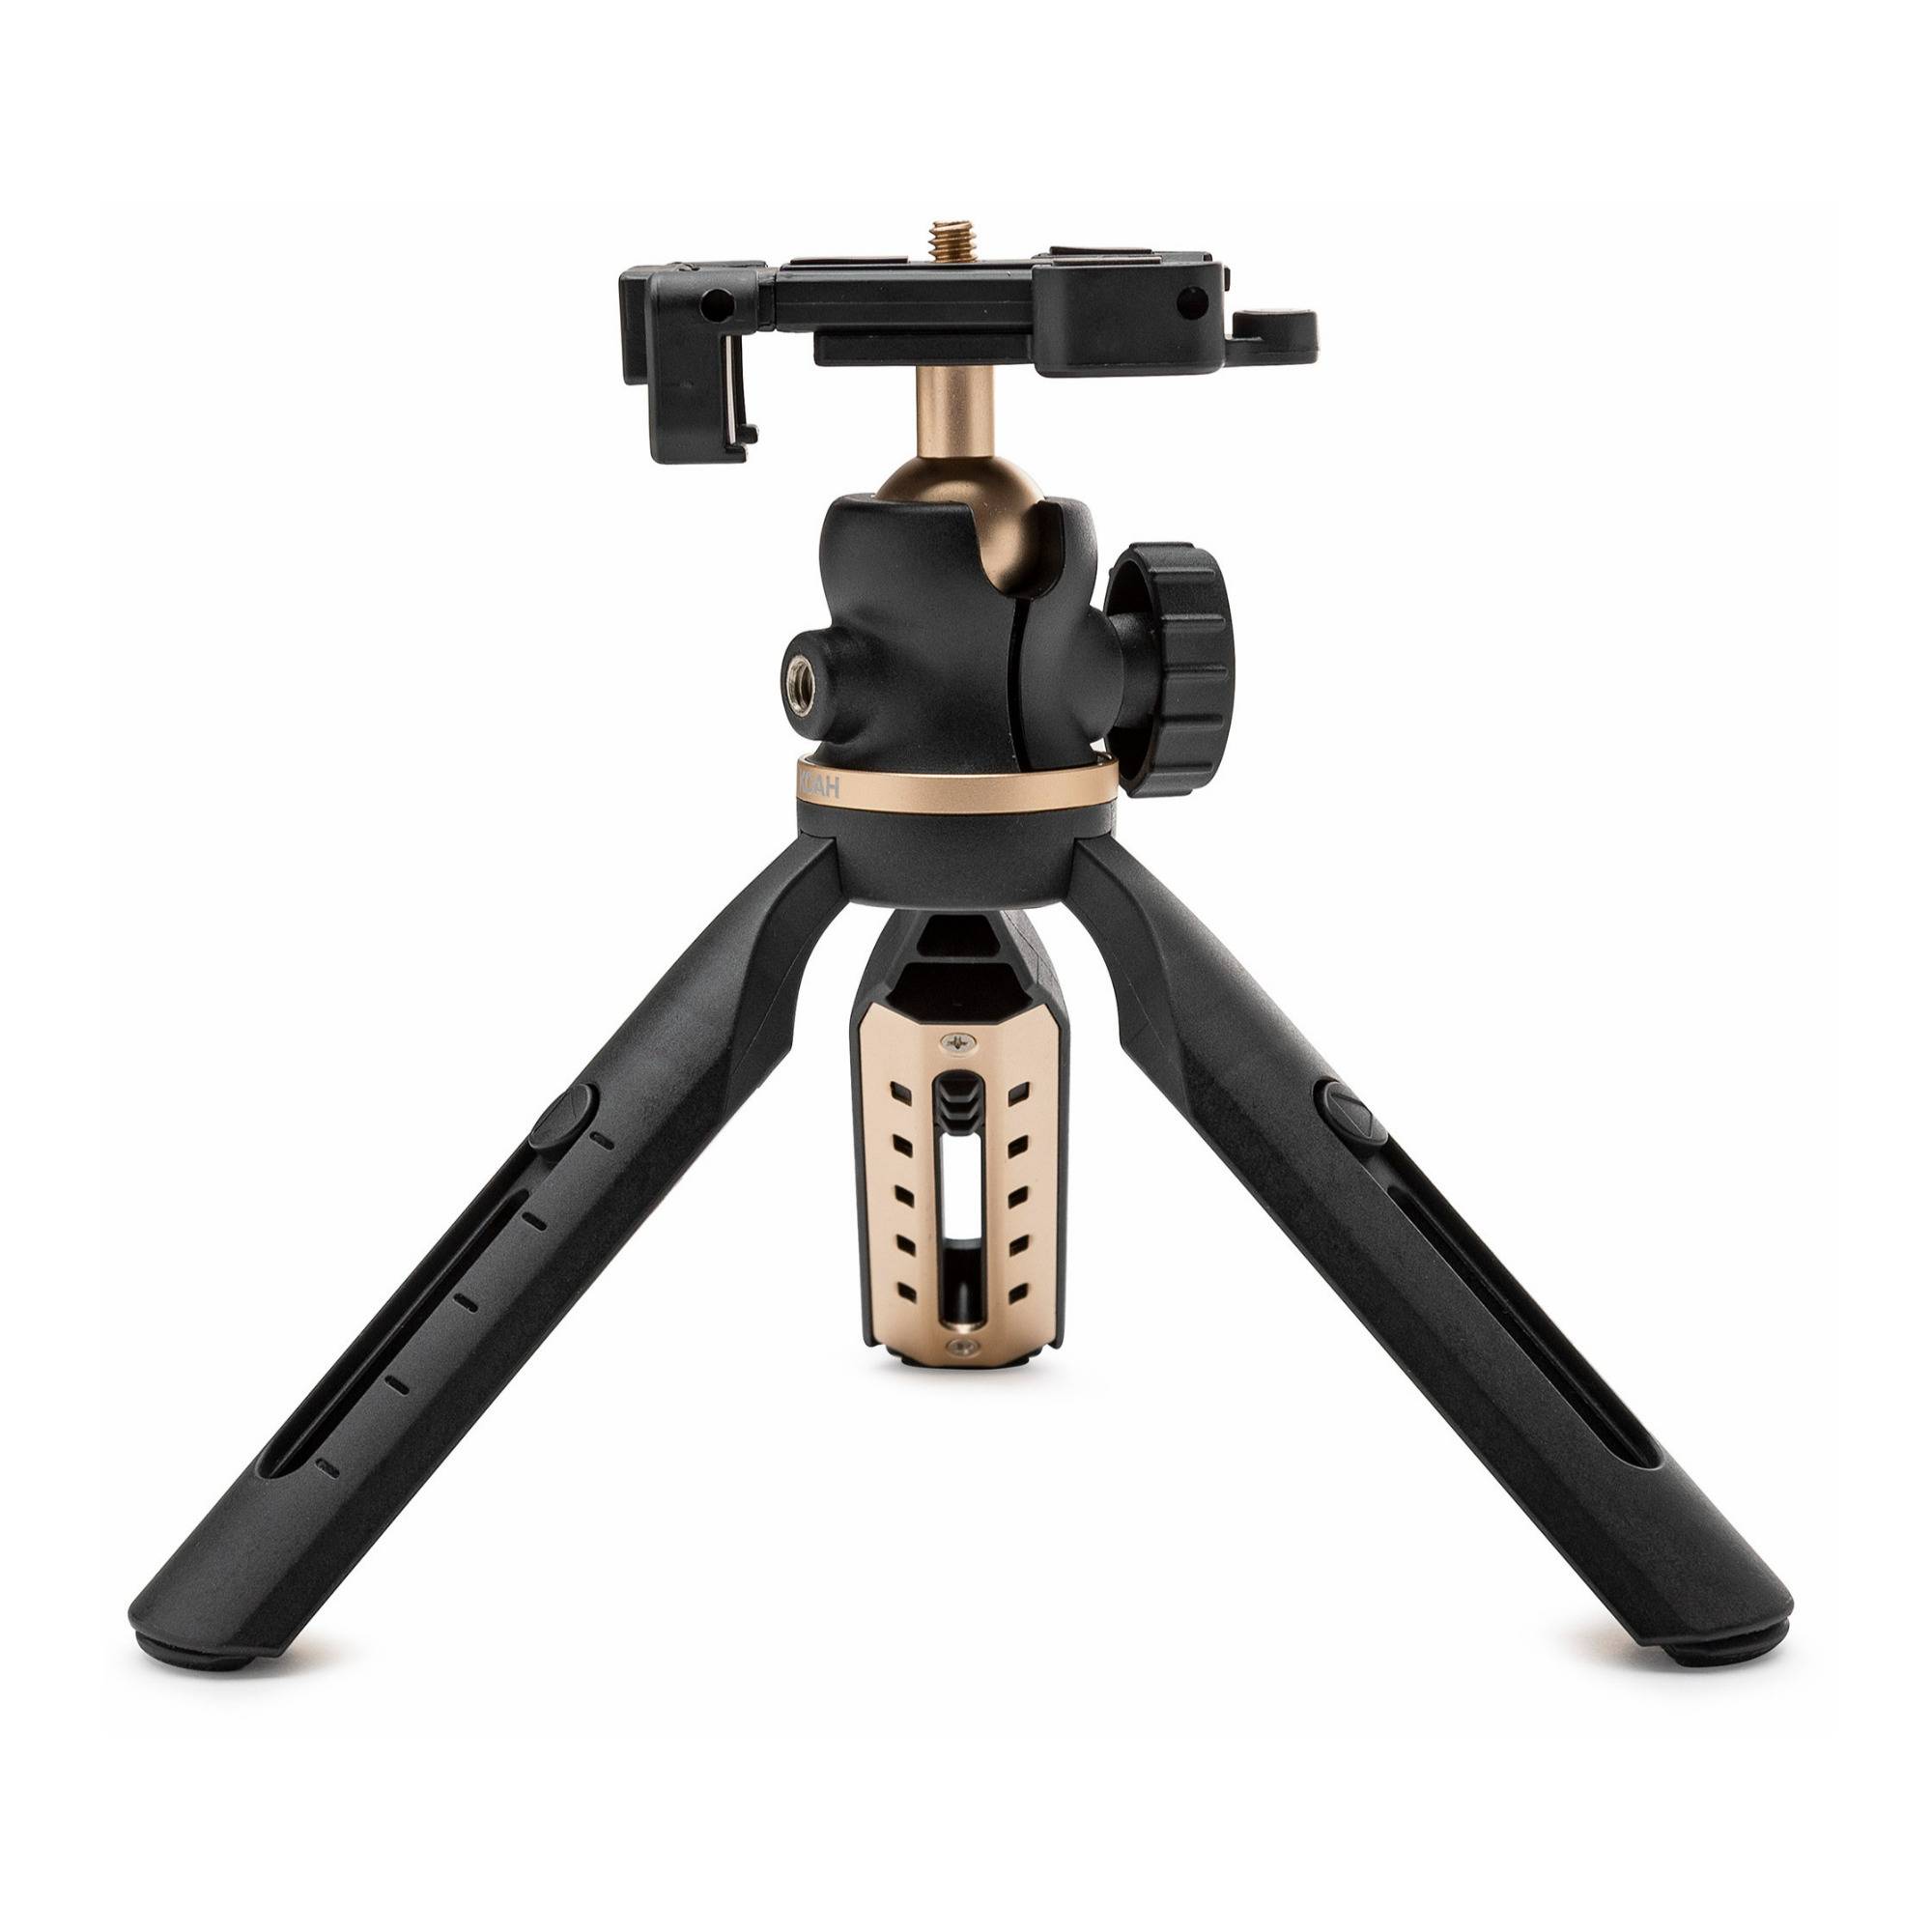 Koah Joey Mini Extendable Tripod with Built-in Phone Mount for Mobile Content Creators